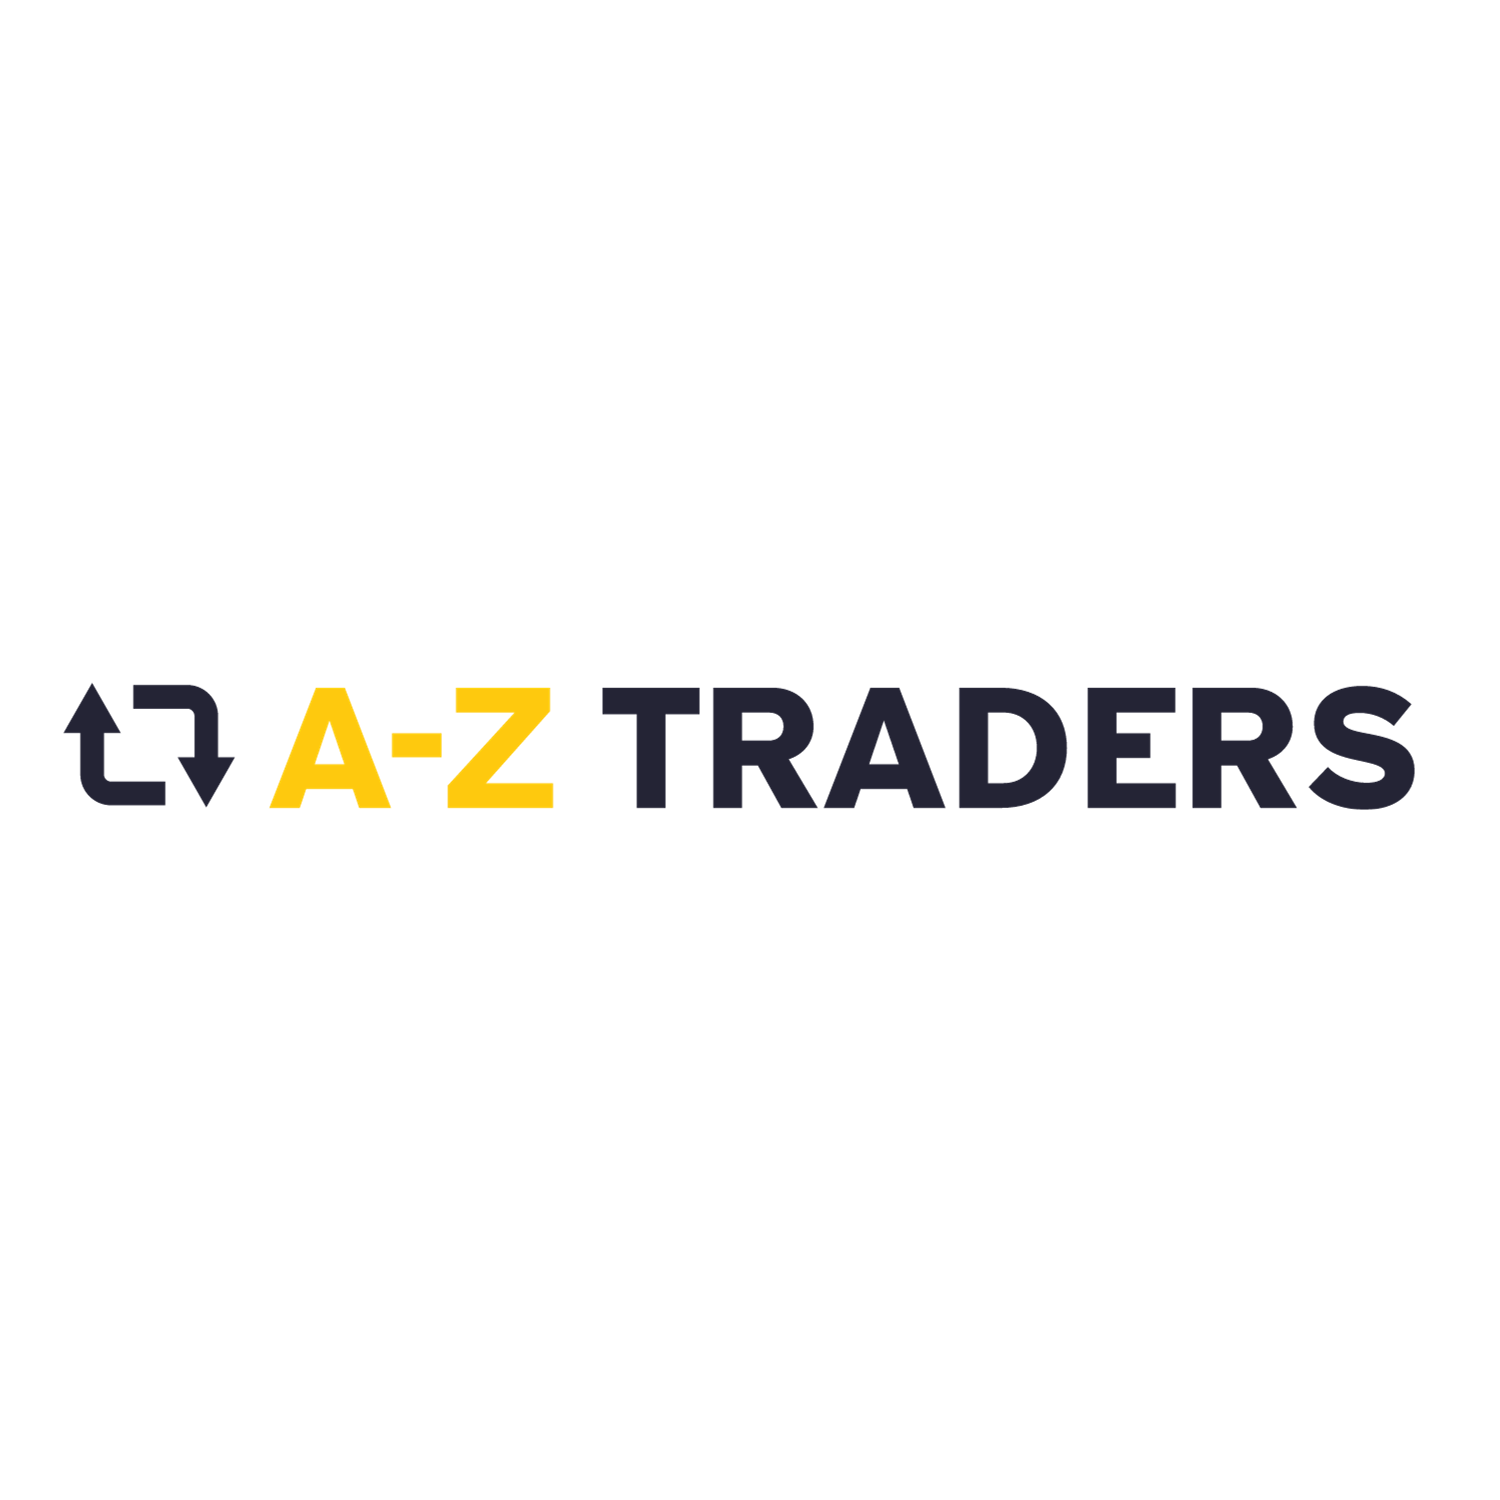 A-Z TRADERS